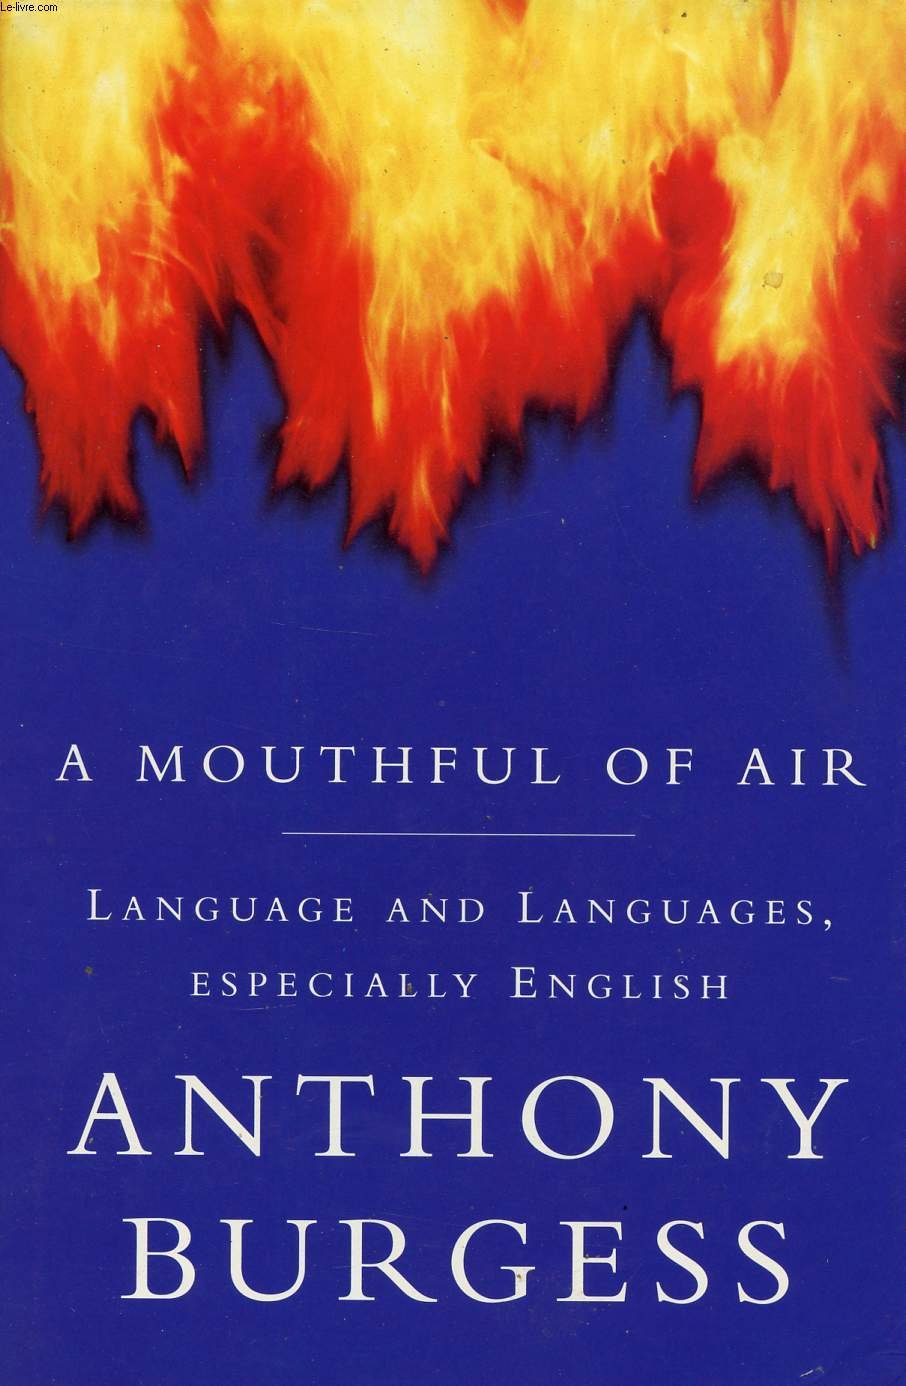 A Mouthful of Air: Languages and Language, Especially English